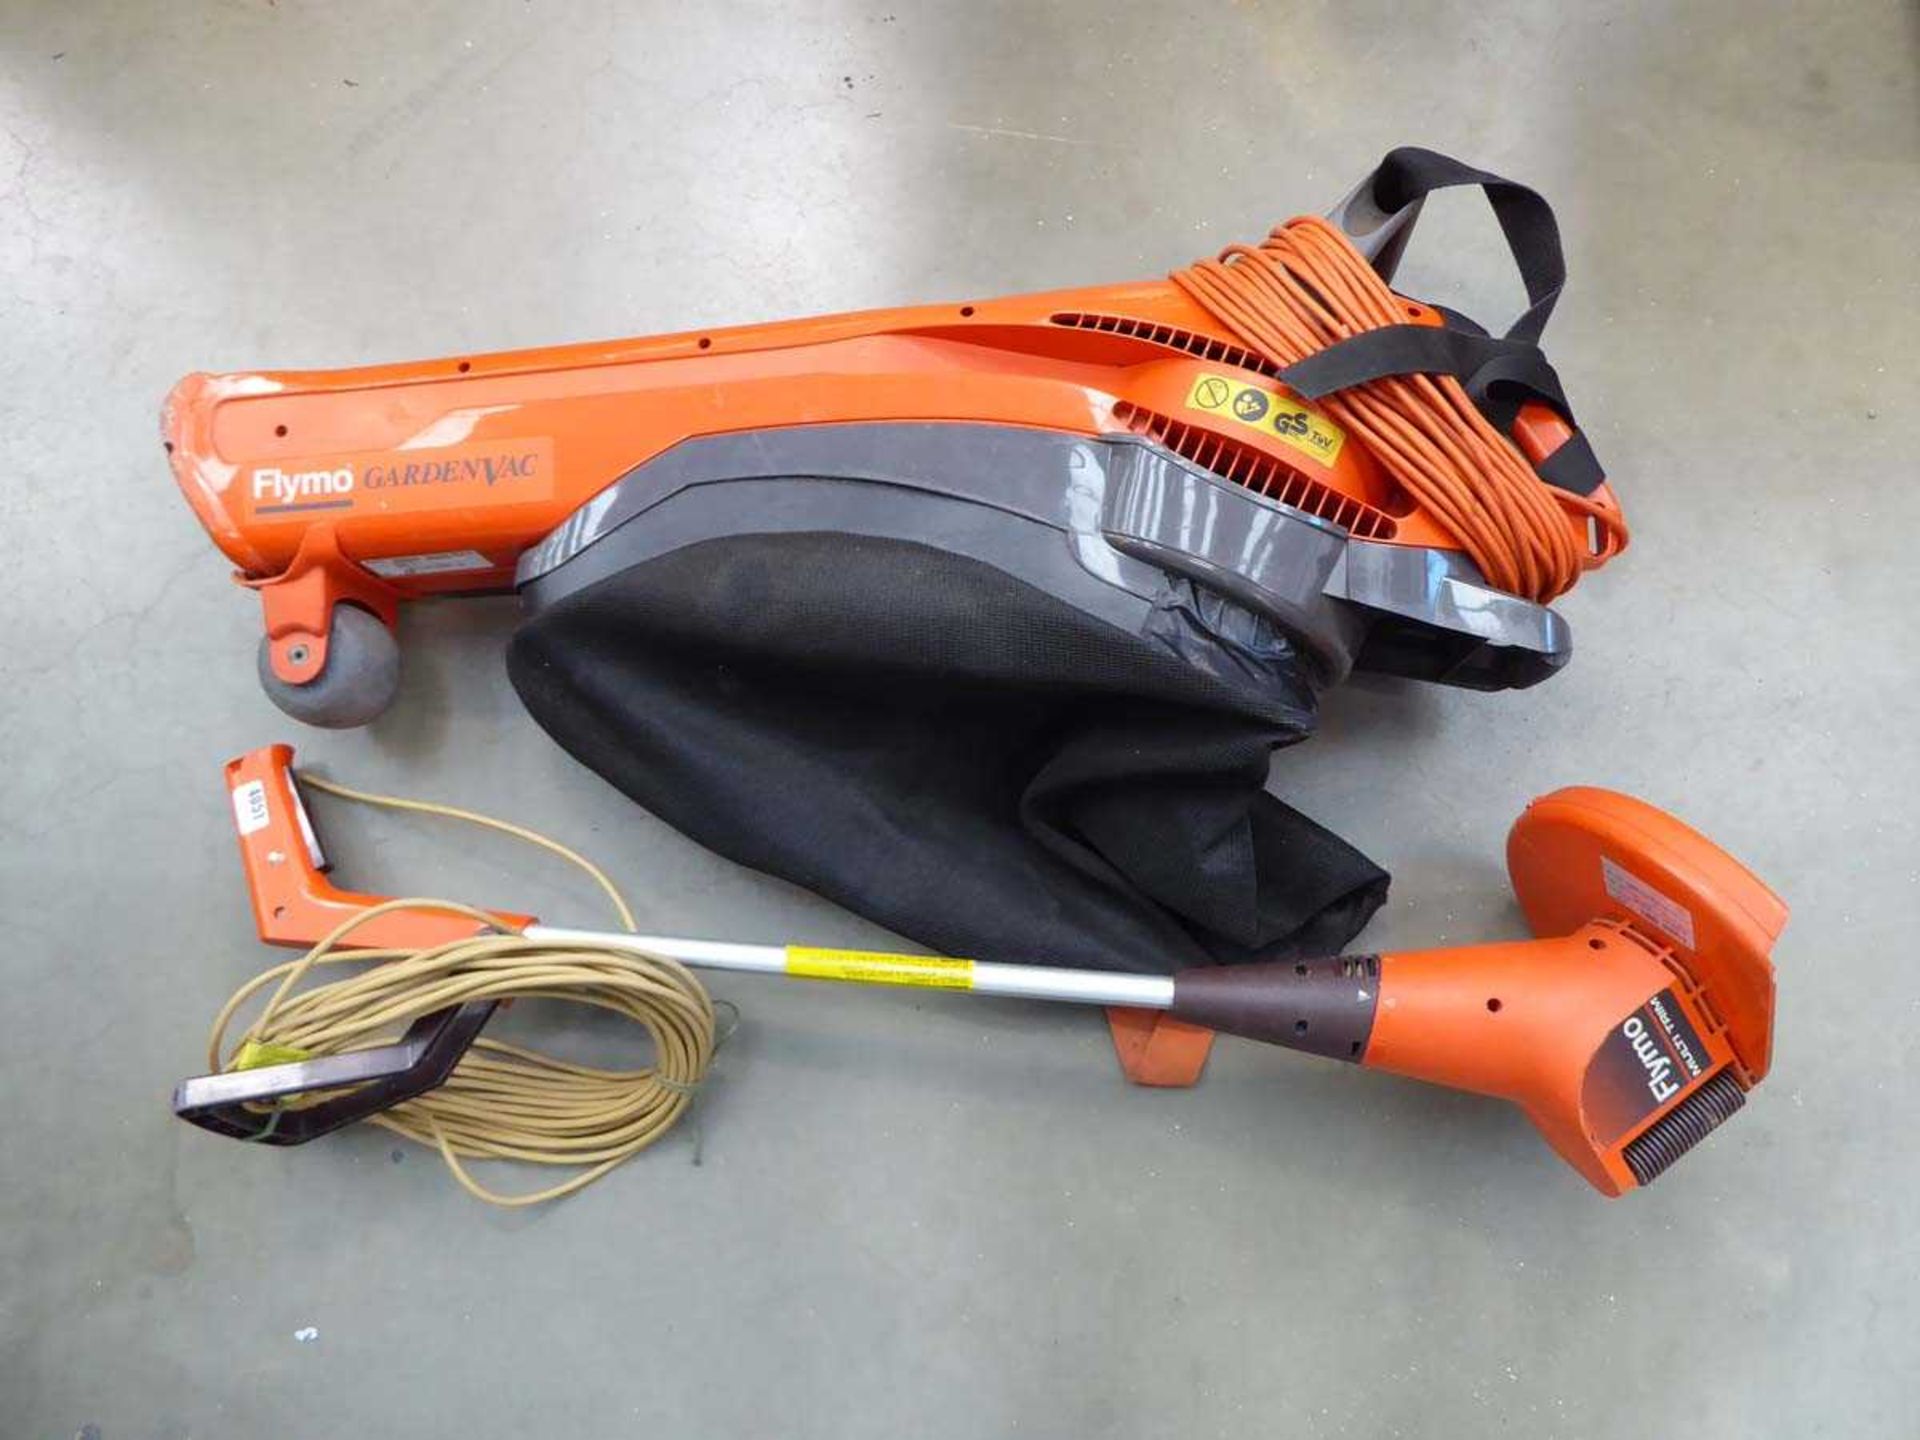 Flymo blow vac and a Flymo strimmer